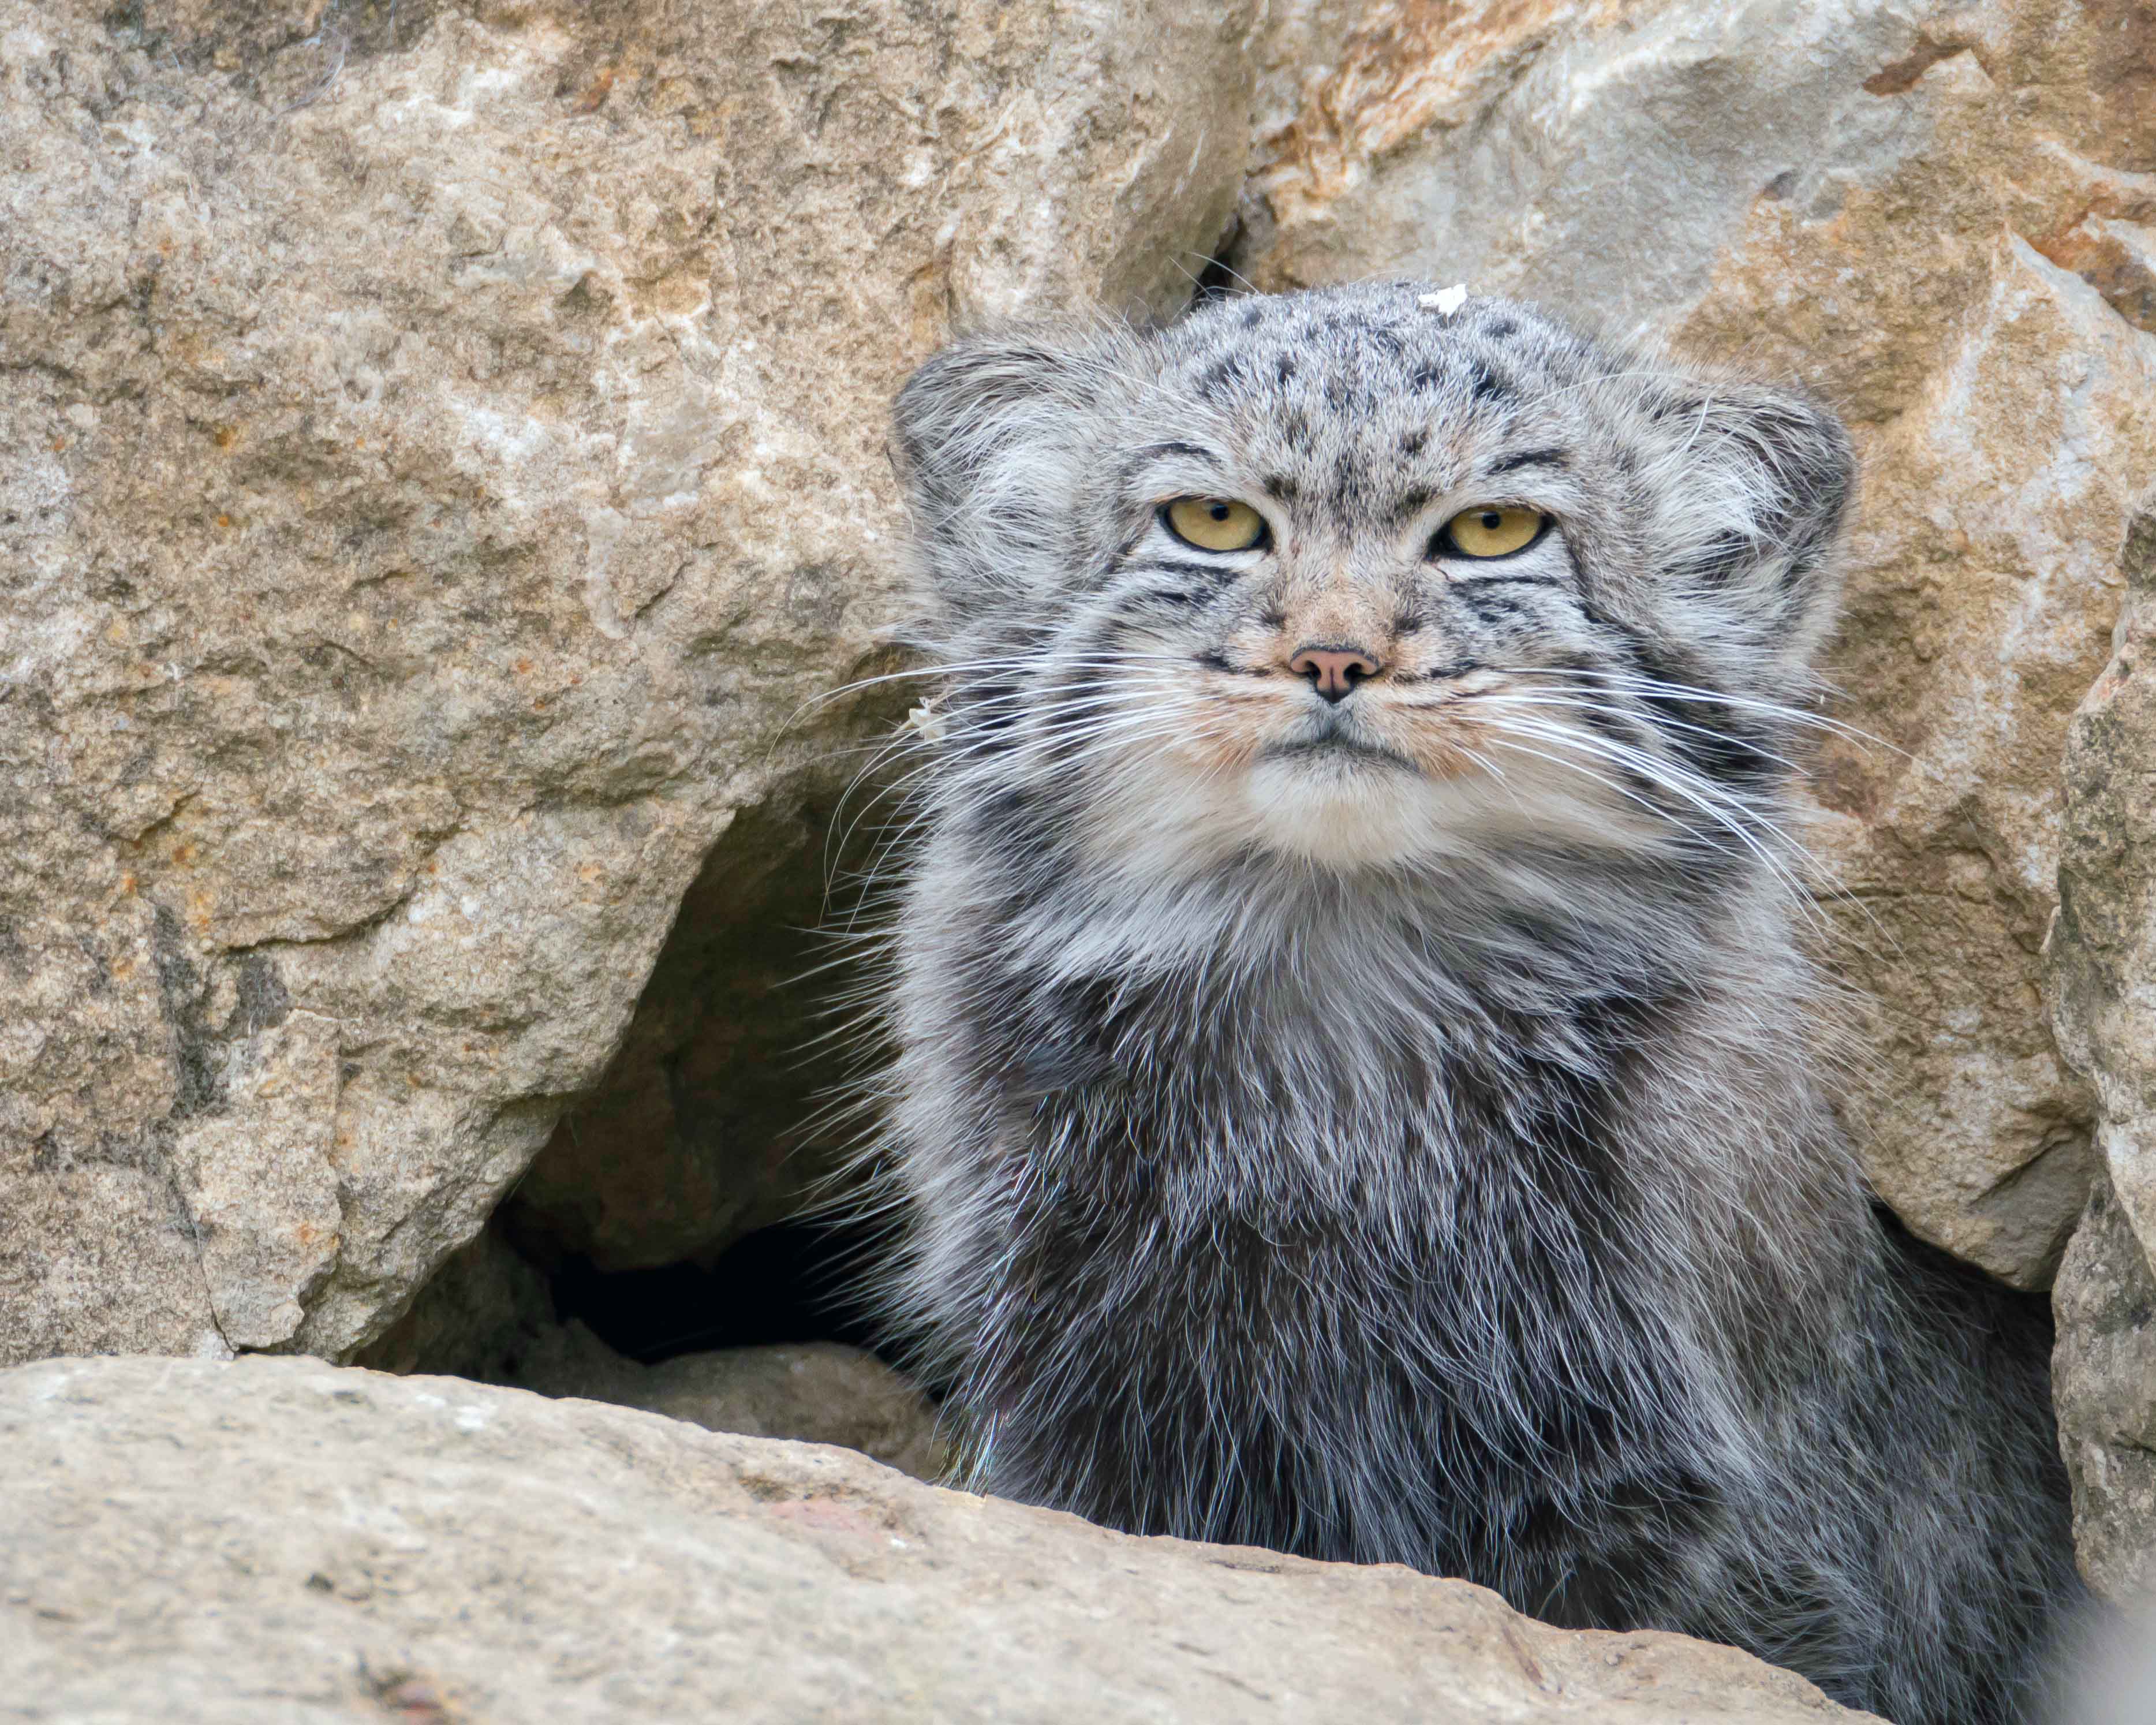 2 Rare Pallas's Cats Found Somehow Living on Mount Everest—And Their  'Grumpy' Looks Are Adorable